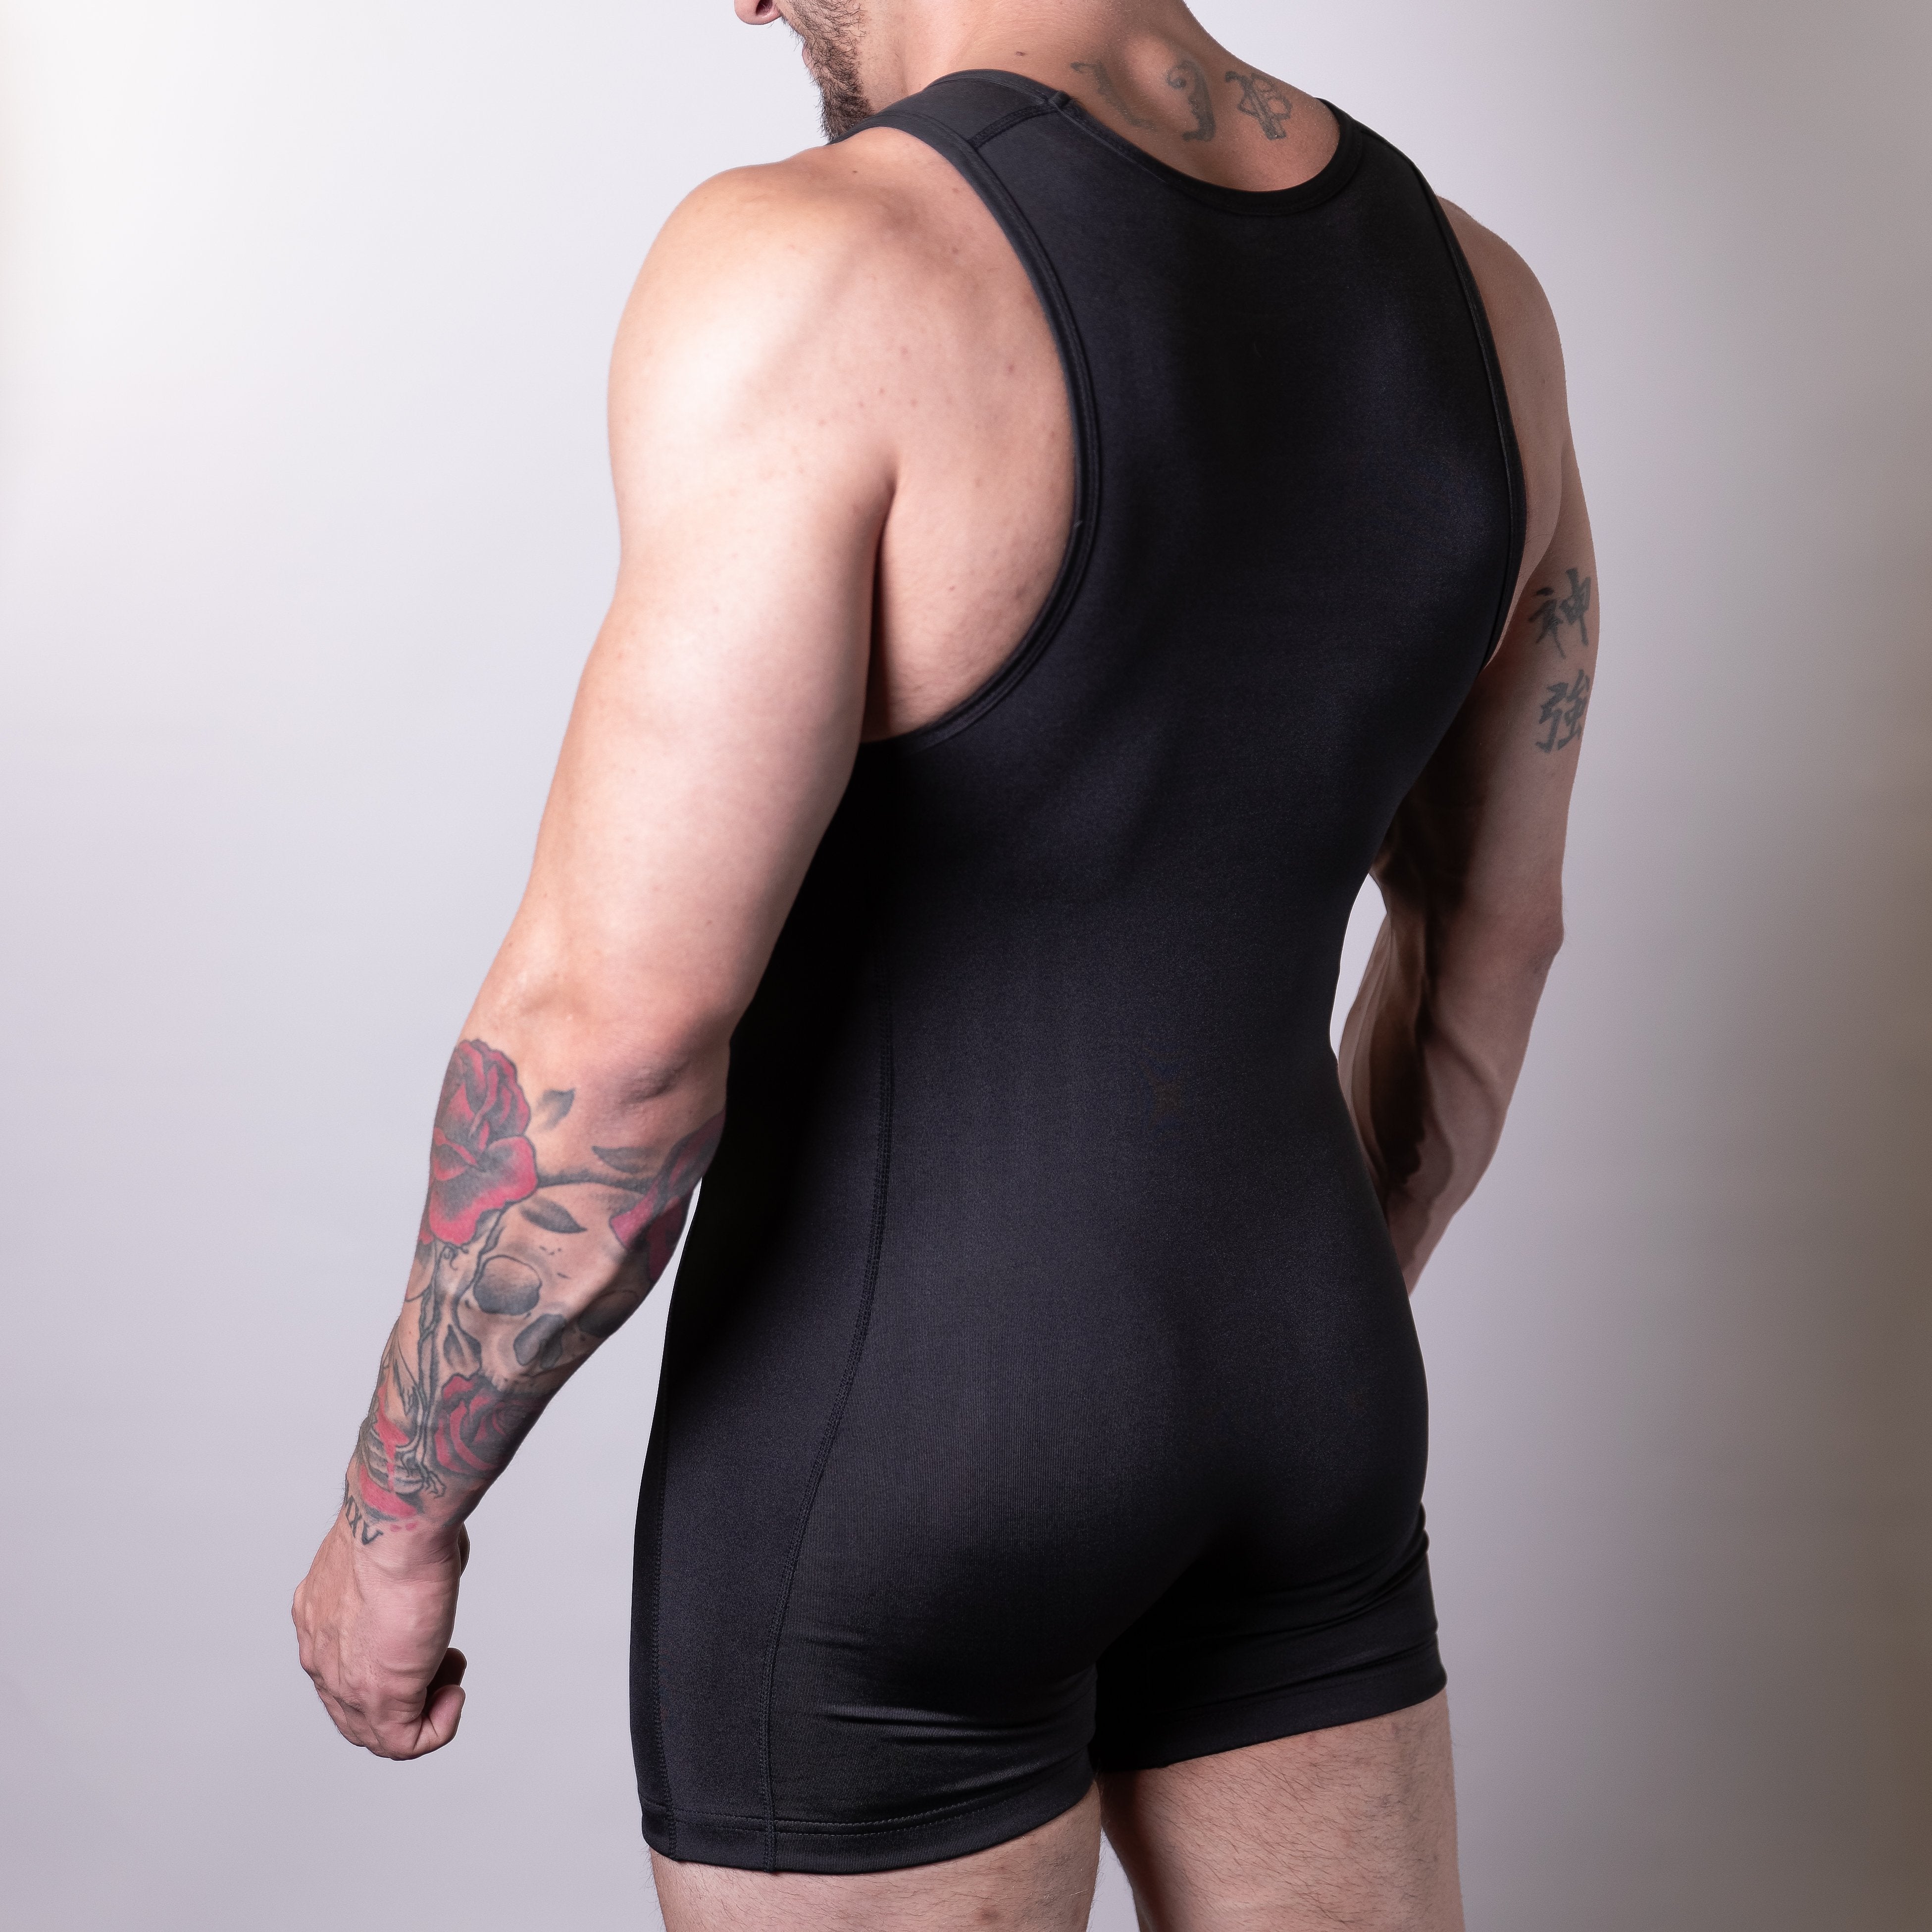 A7 IPF Approved Powerlifting Singlet is designed exclusively for powerlifting. It is very comfortable to wear and feels soft on bare skin. A7 Powerlifting Singlet is made from breathable fabric and provides compression during your lifts. The perfect piece of IPF Approved Kit!